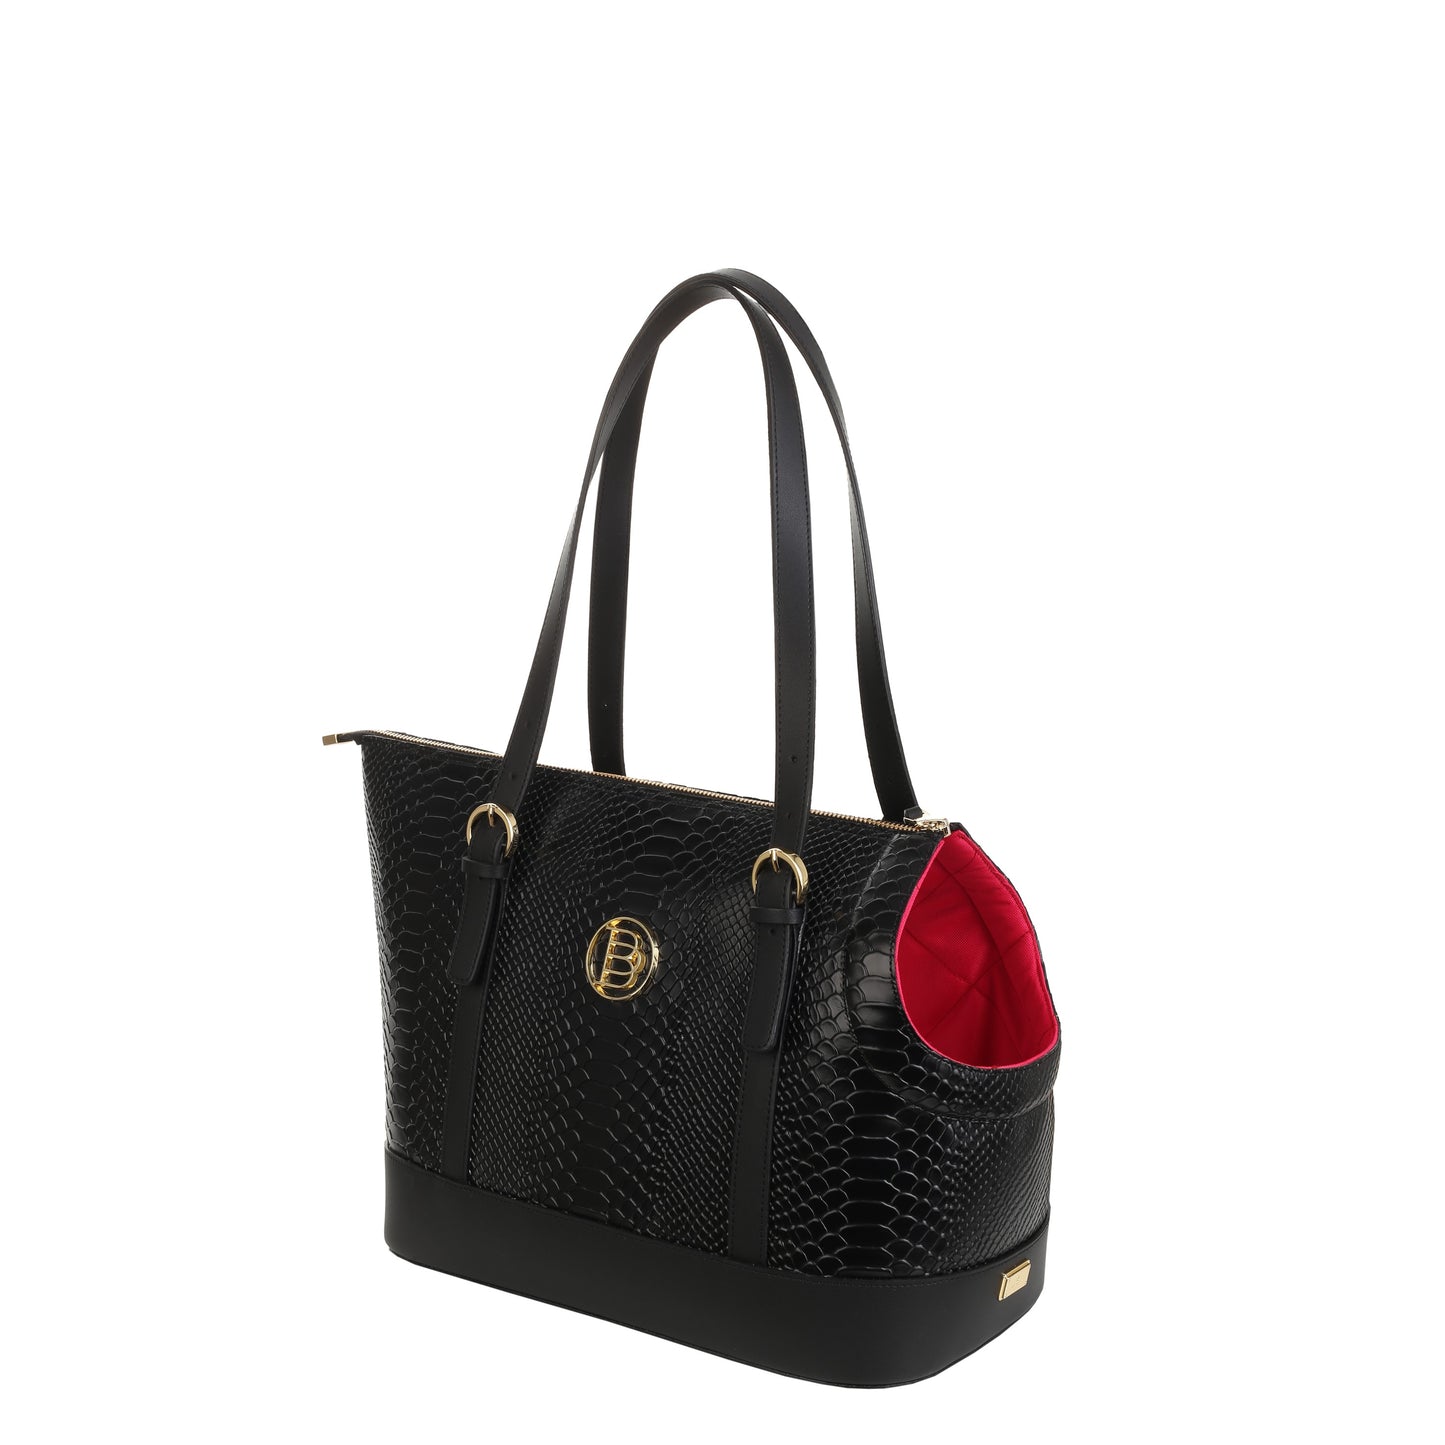 BLACK leather bag for your pet